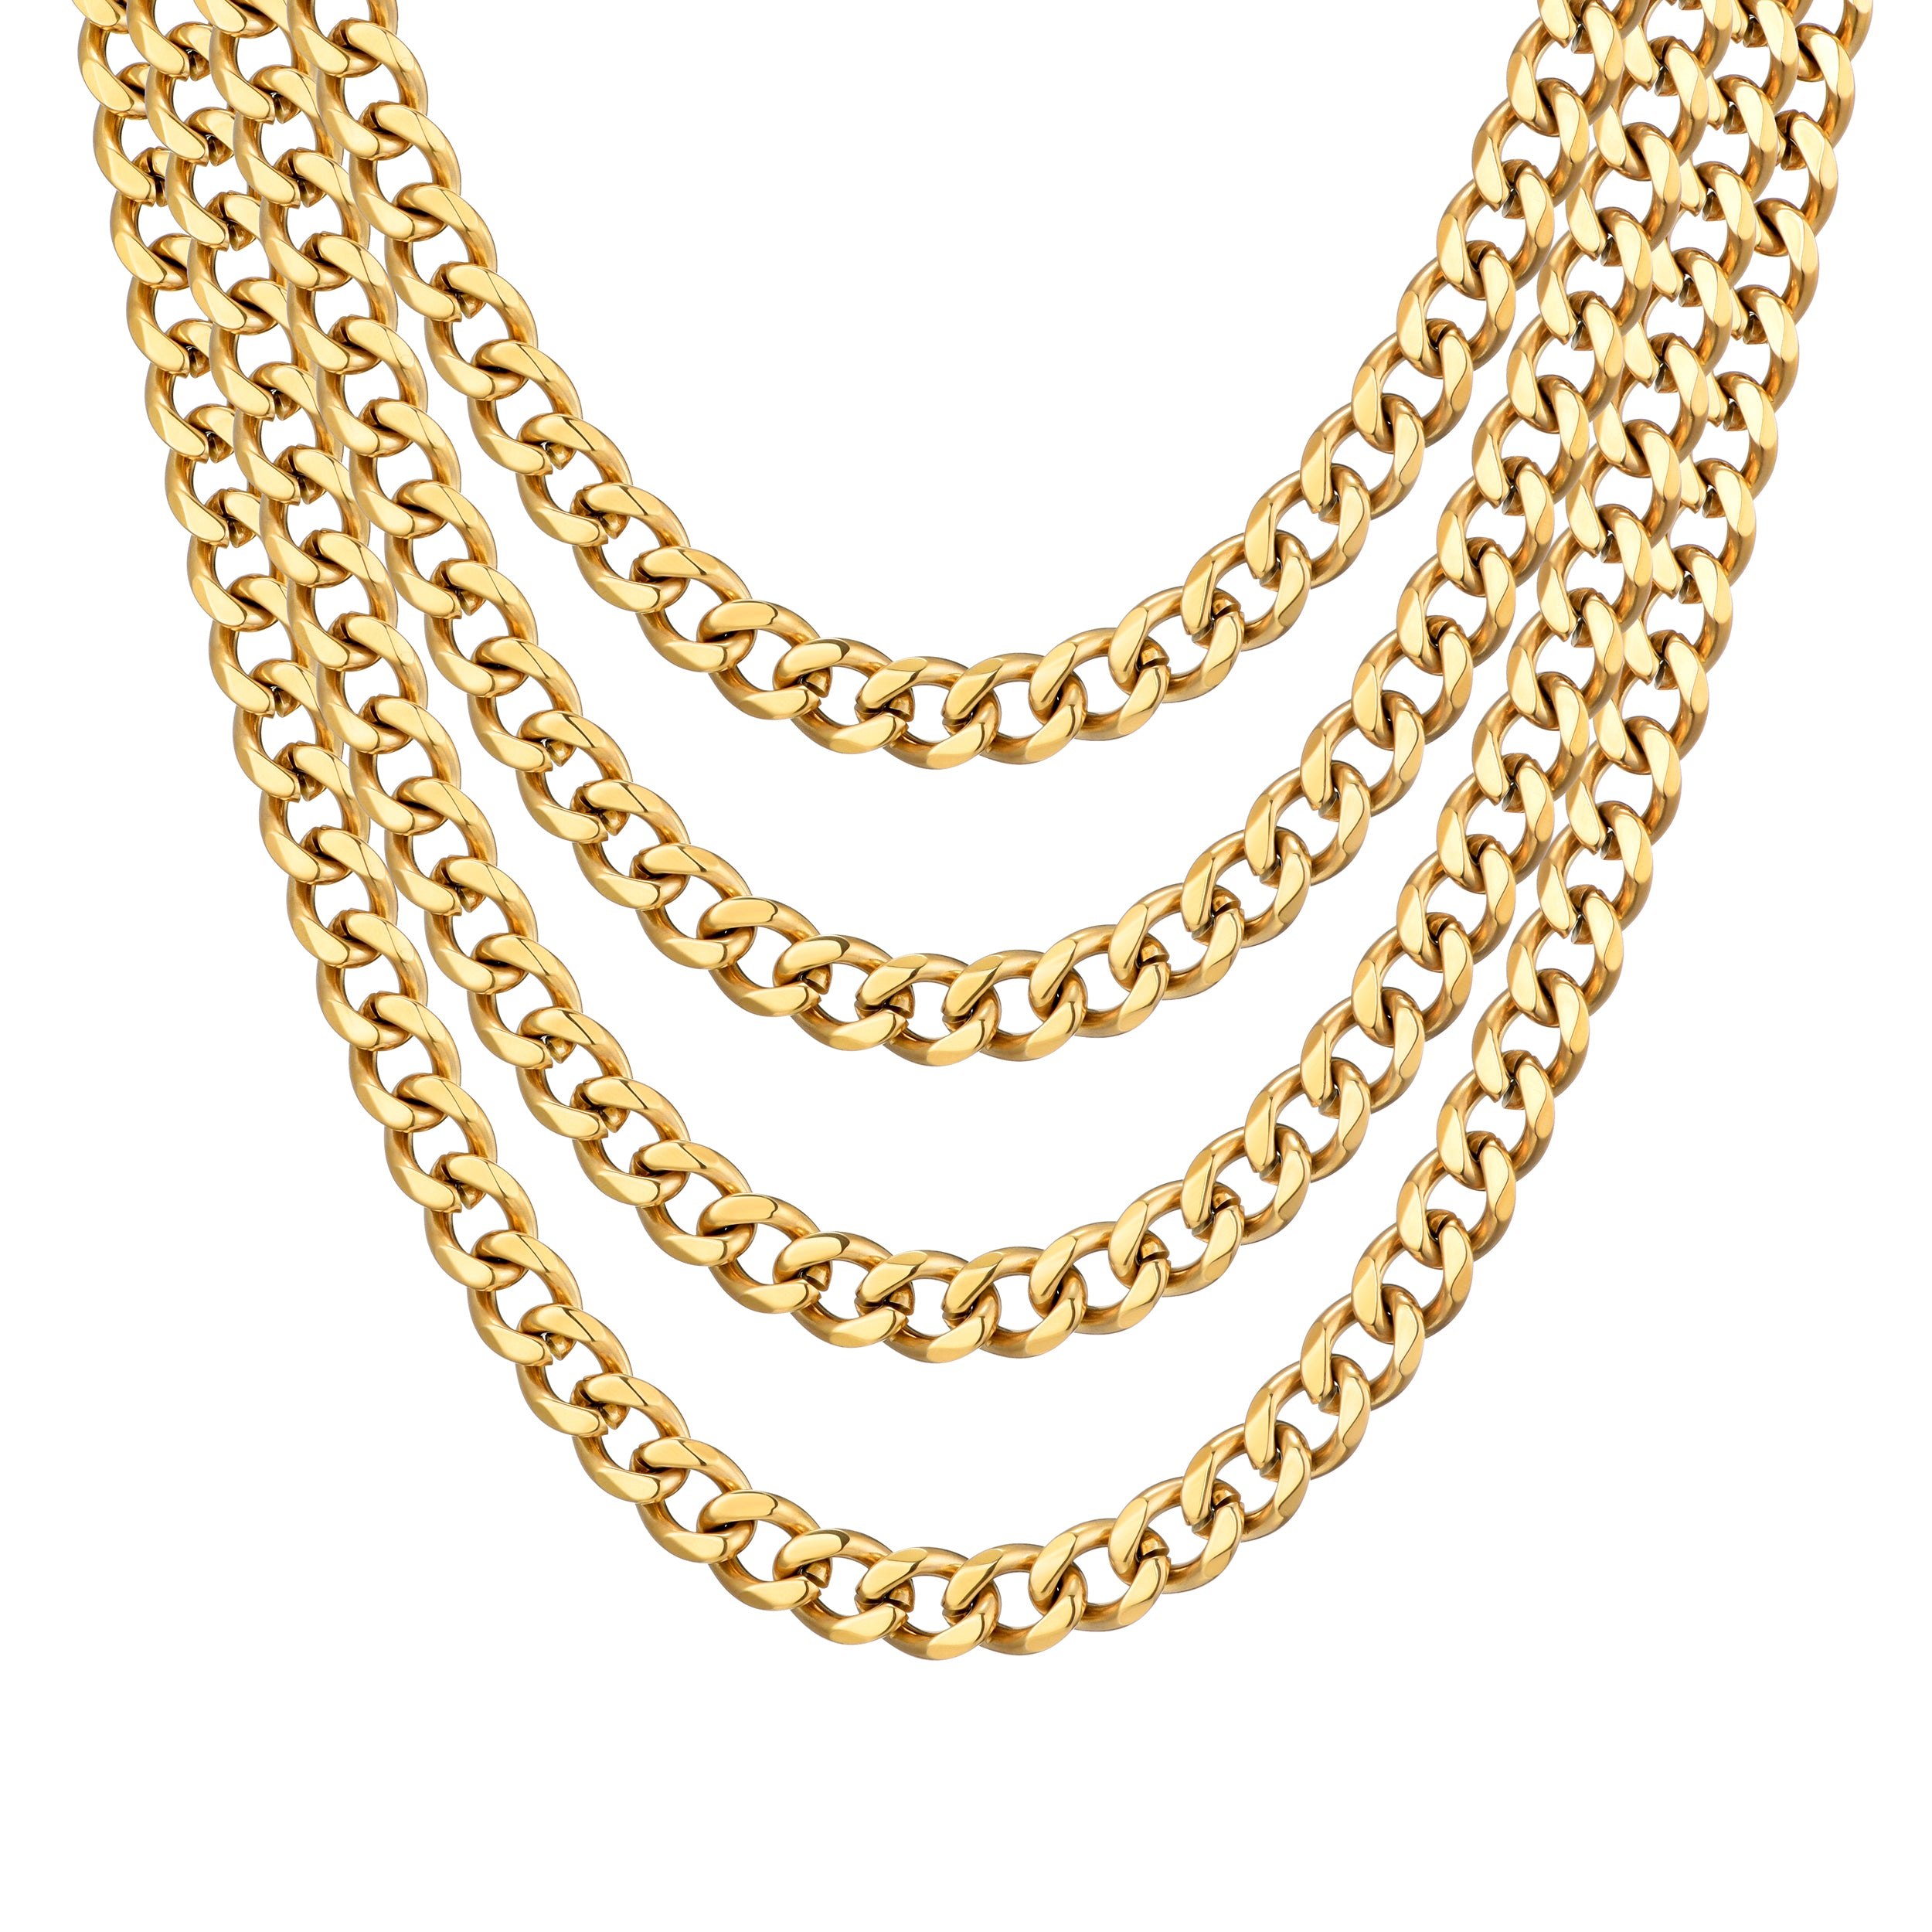 Men's 12mm Gold Plated Steel 18-24 Inch Curb Chain Necklace